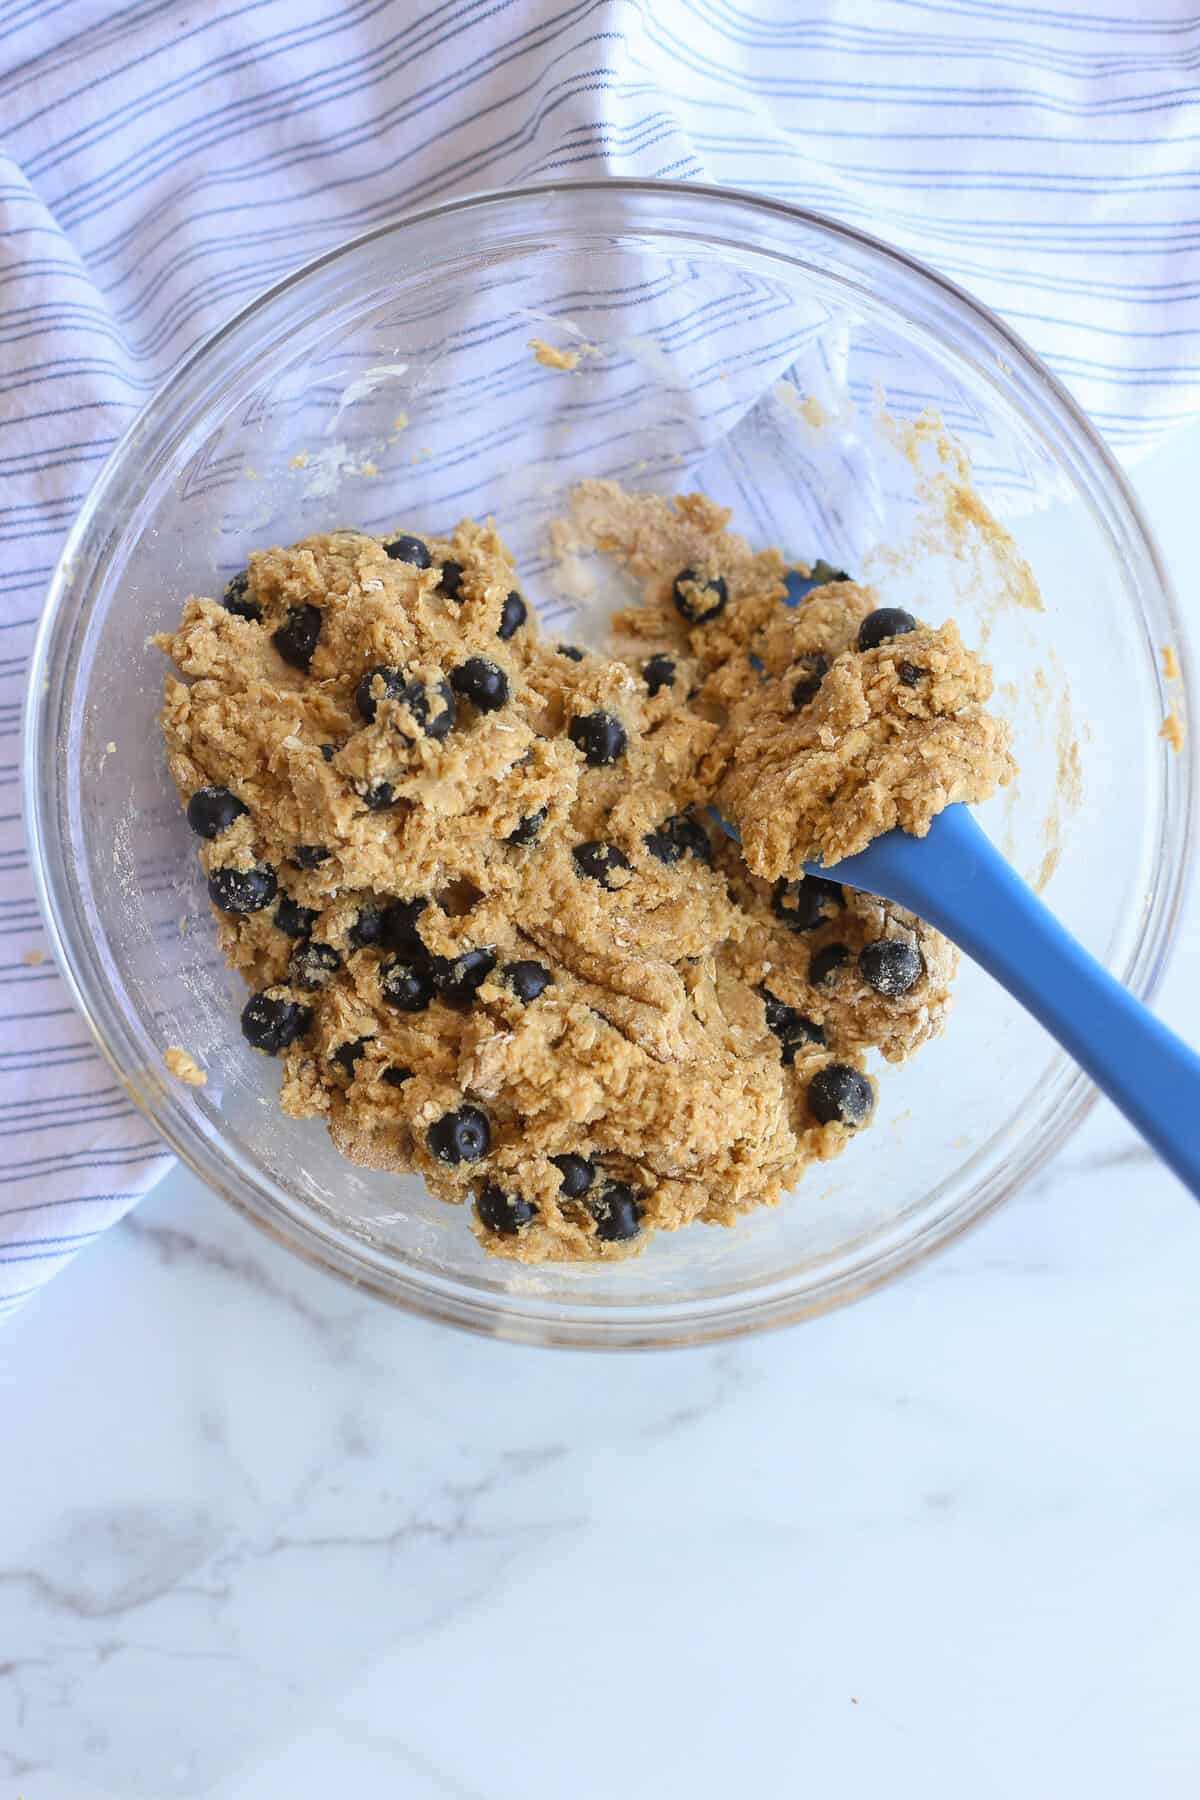 Batter for blueberry oatmeal muffins mixed together in a glass bowl.